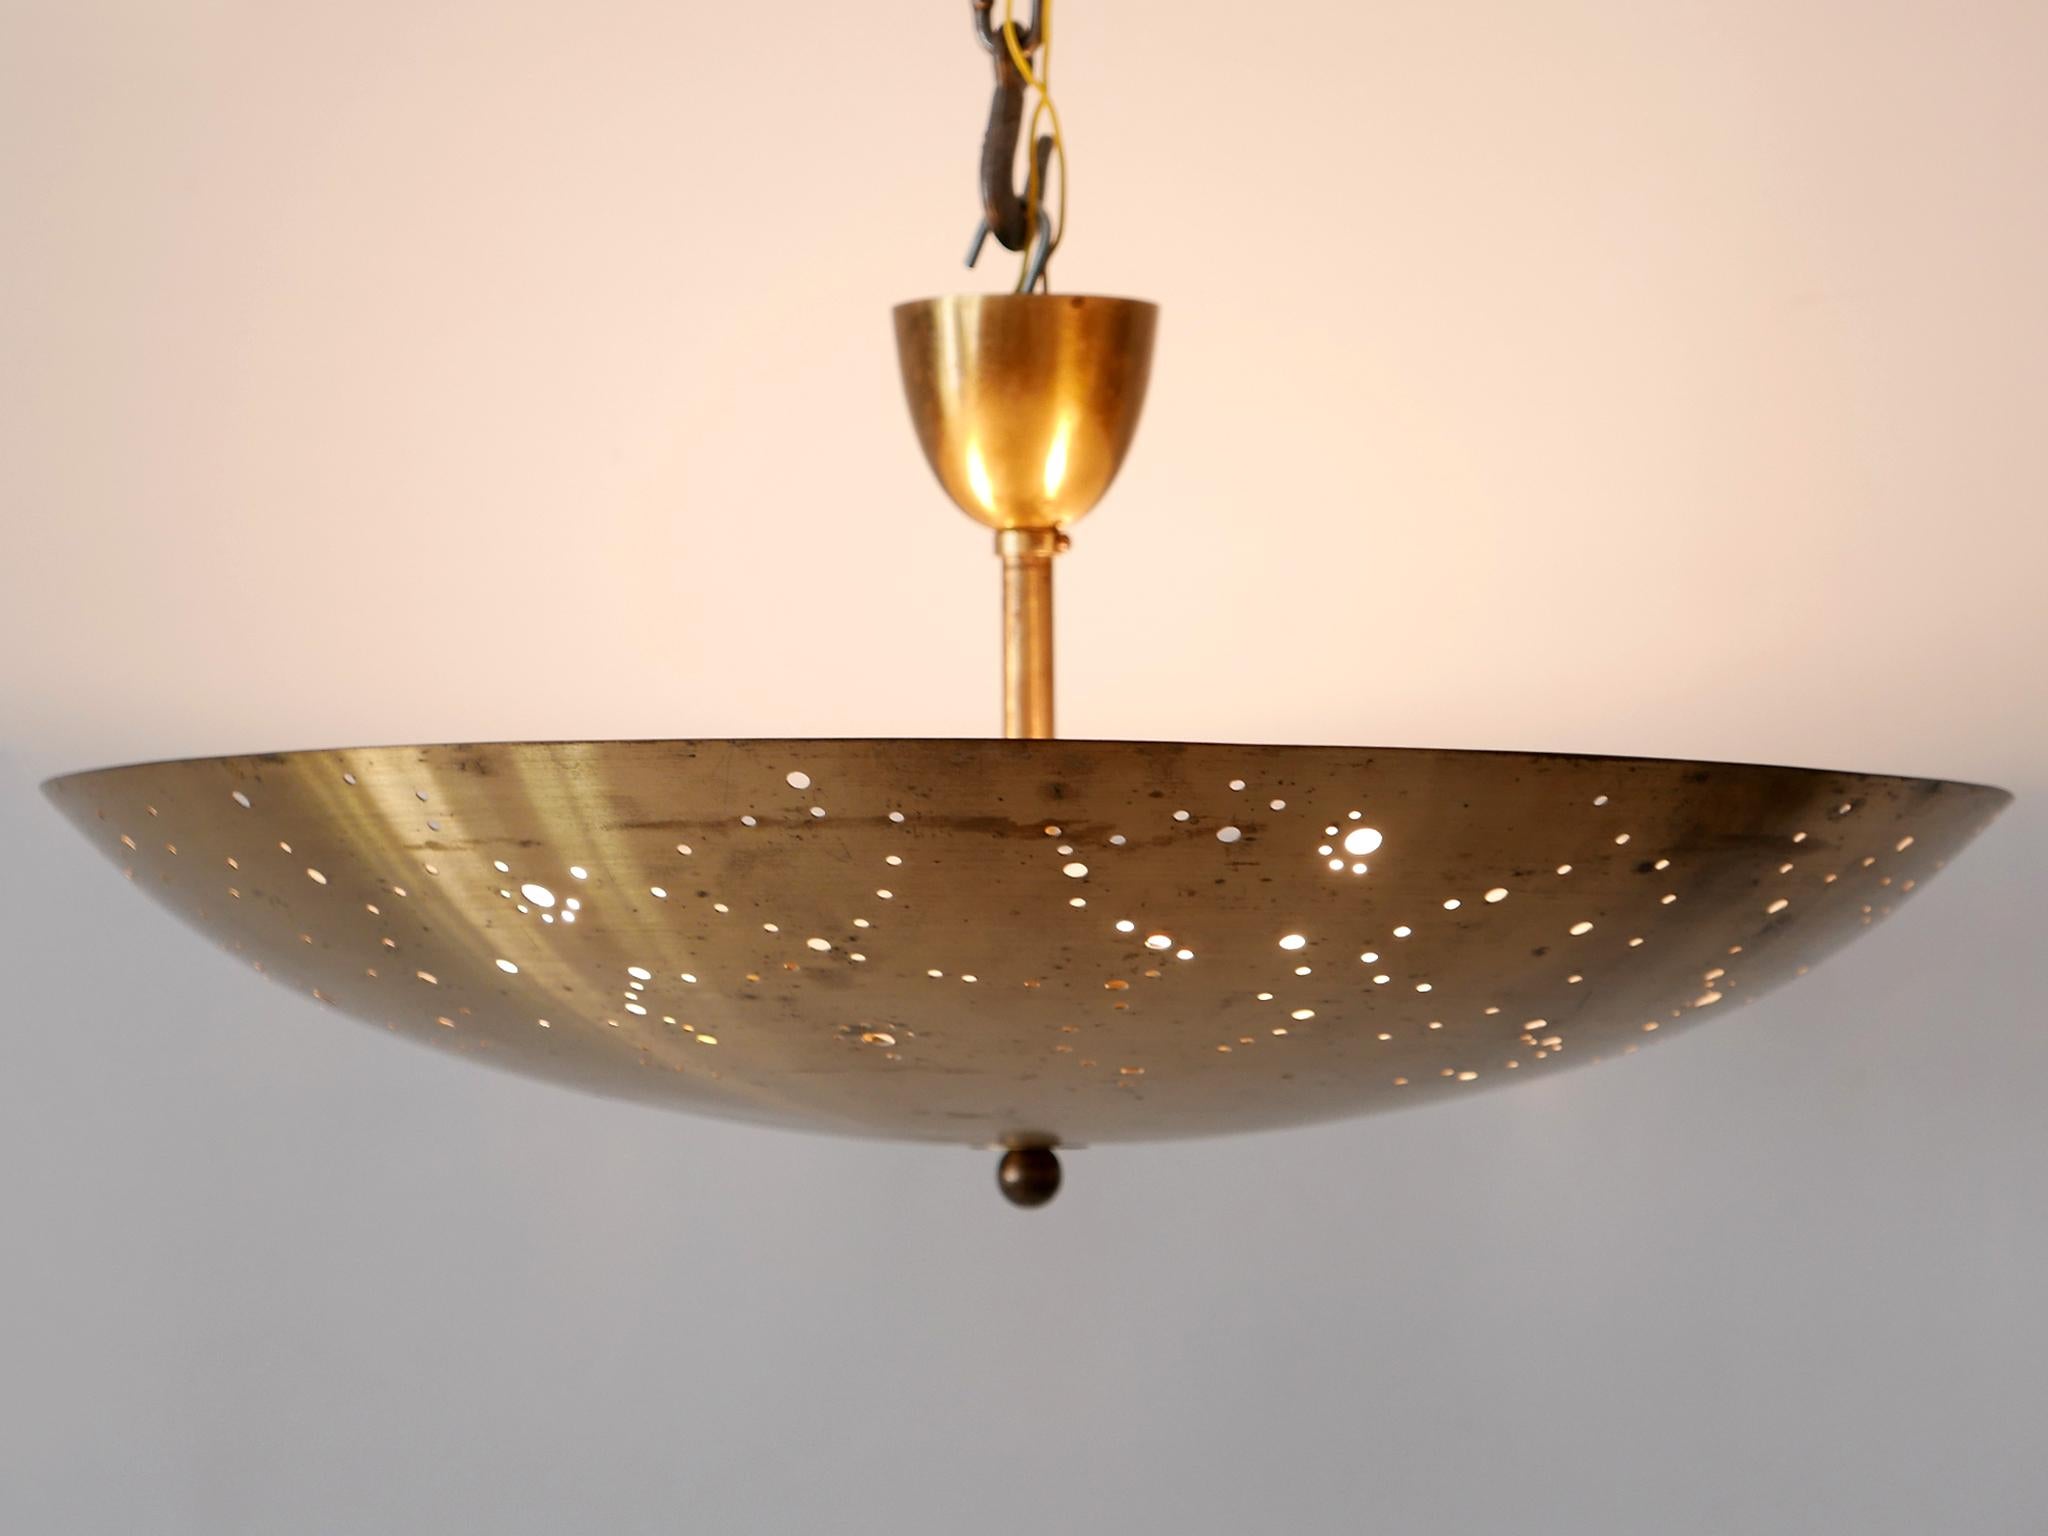 Extremely rare, elegant and highly decorative Mid-Century Modern perforated brass ceiling fixture / pendant lamp 